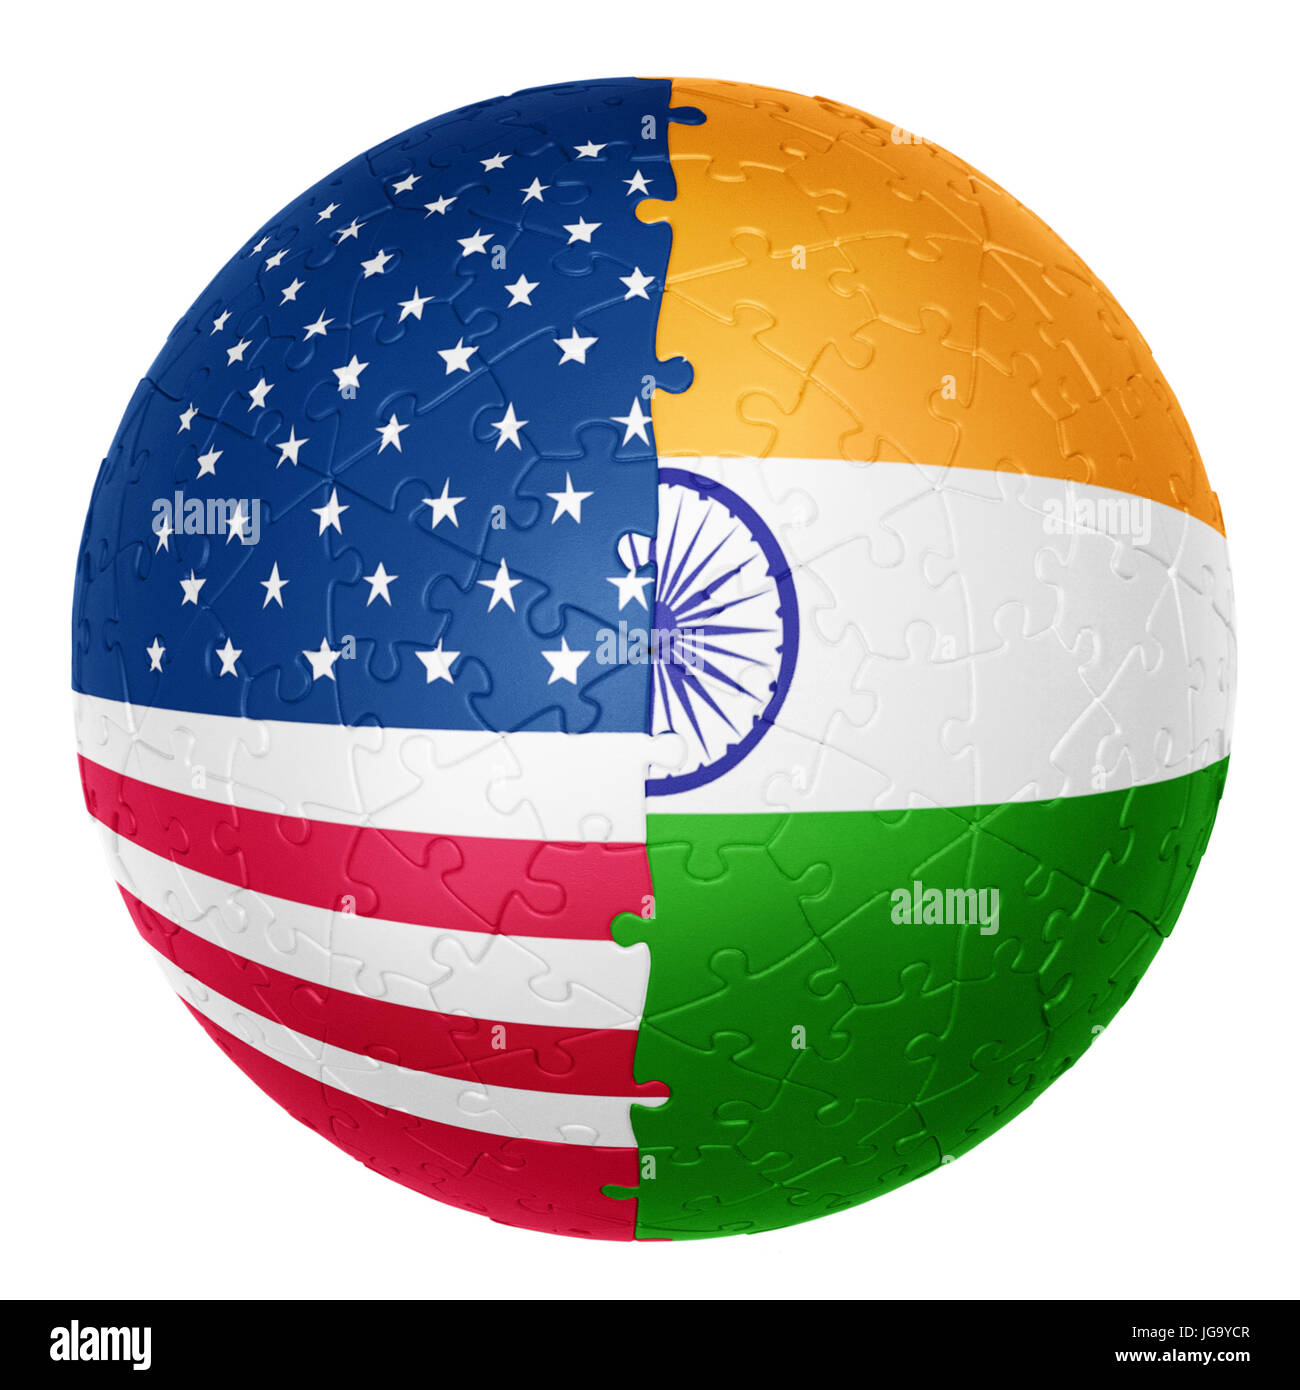 jigsaw ball one half is the USA flag the other half is the India flag 3D illusions Stock Photo